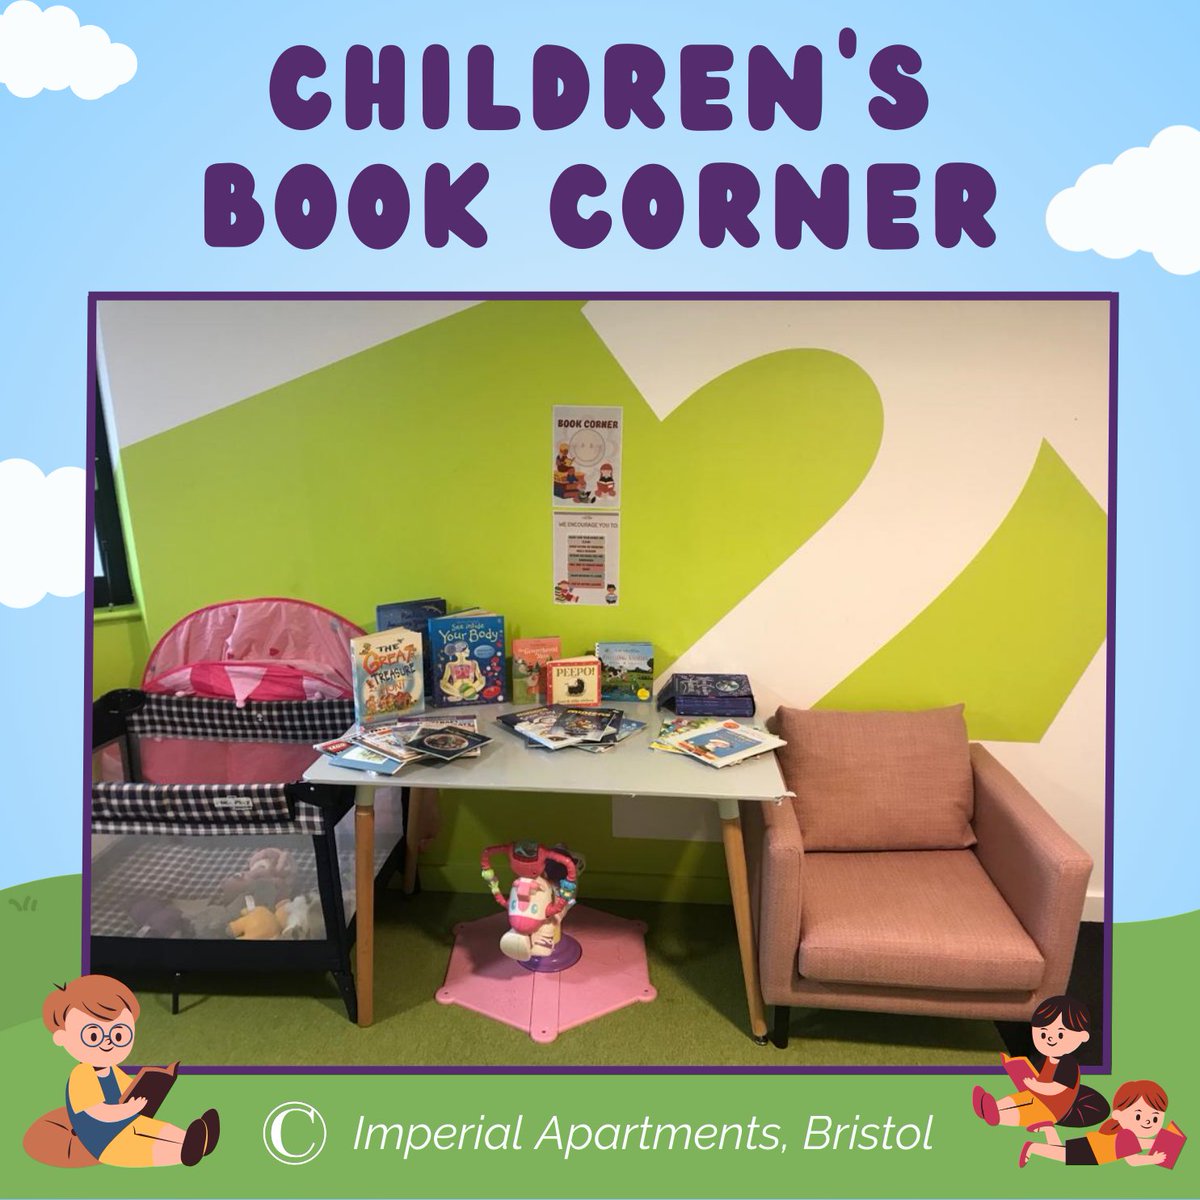 Check out our newest addition at Imperial Apartments - a children's book corner just in time for World Book Day on March 7th! 📚🌟 Residents can read, borrow, and donate books right within our community space.
#worldbookday #bookcorner #community